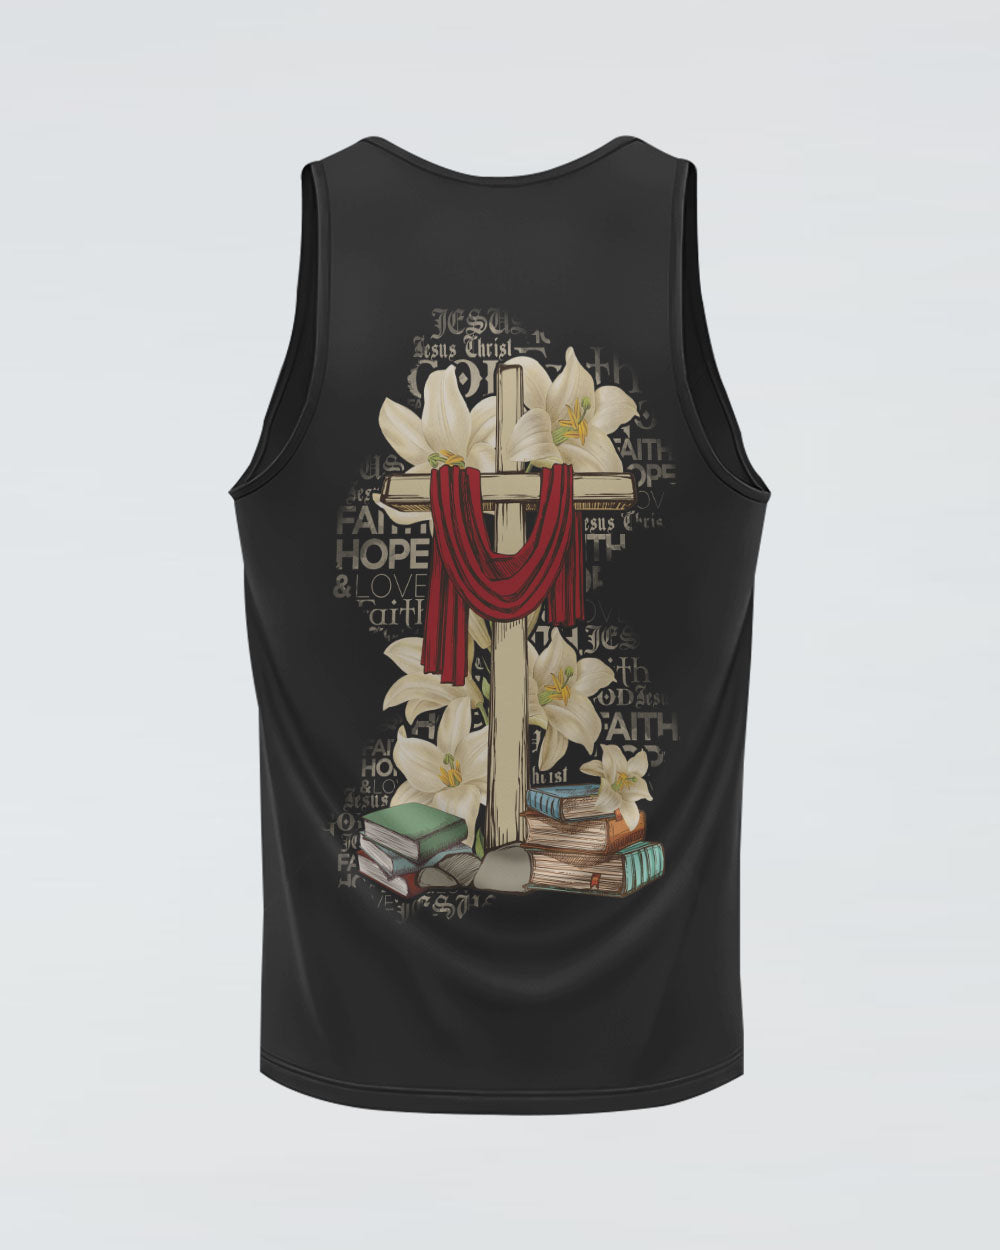 Lily Flower And Cross Book Women's Christian Tanks